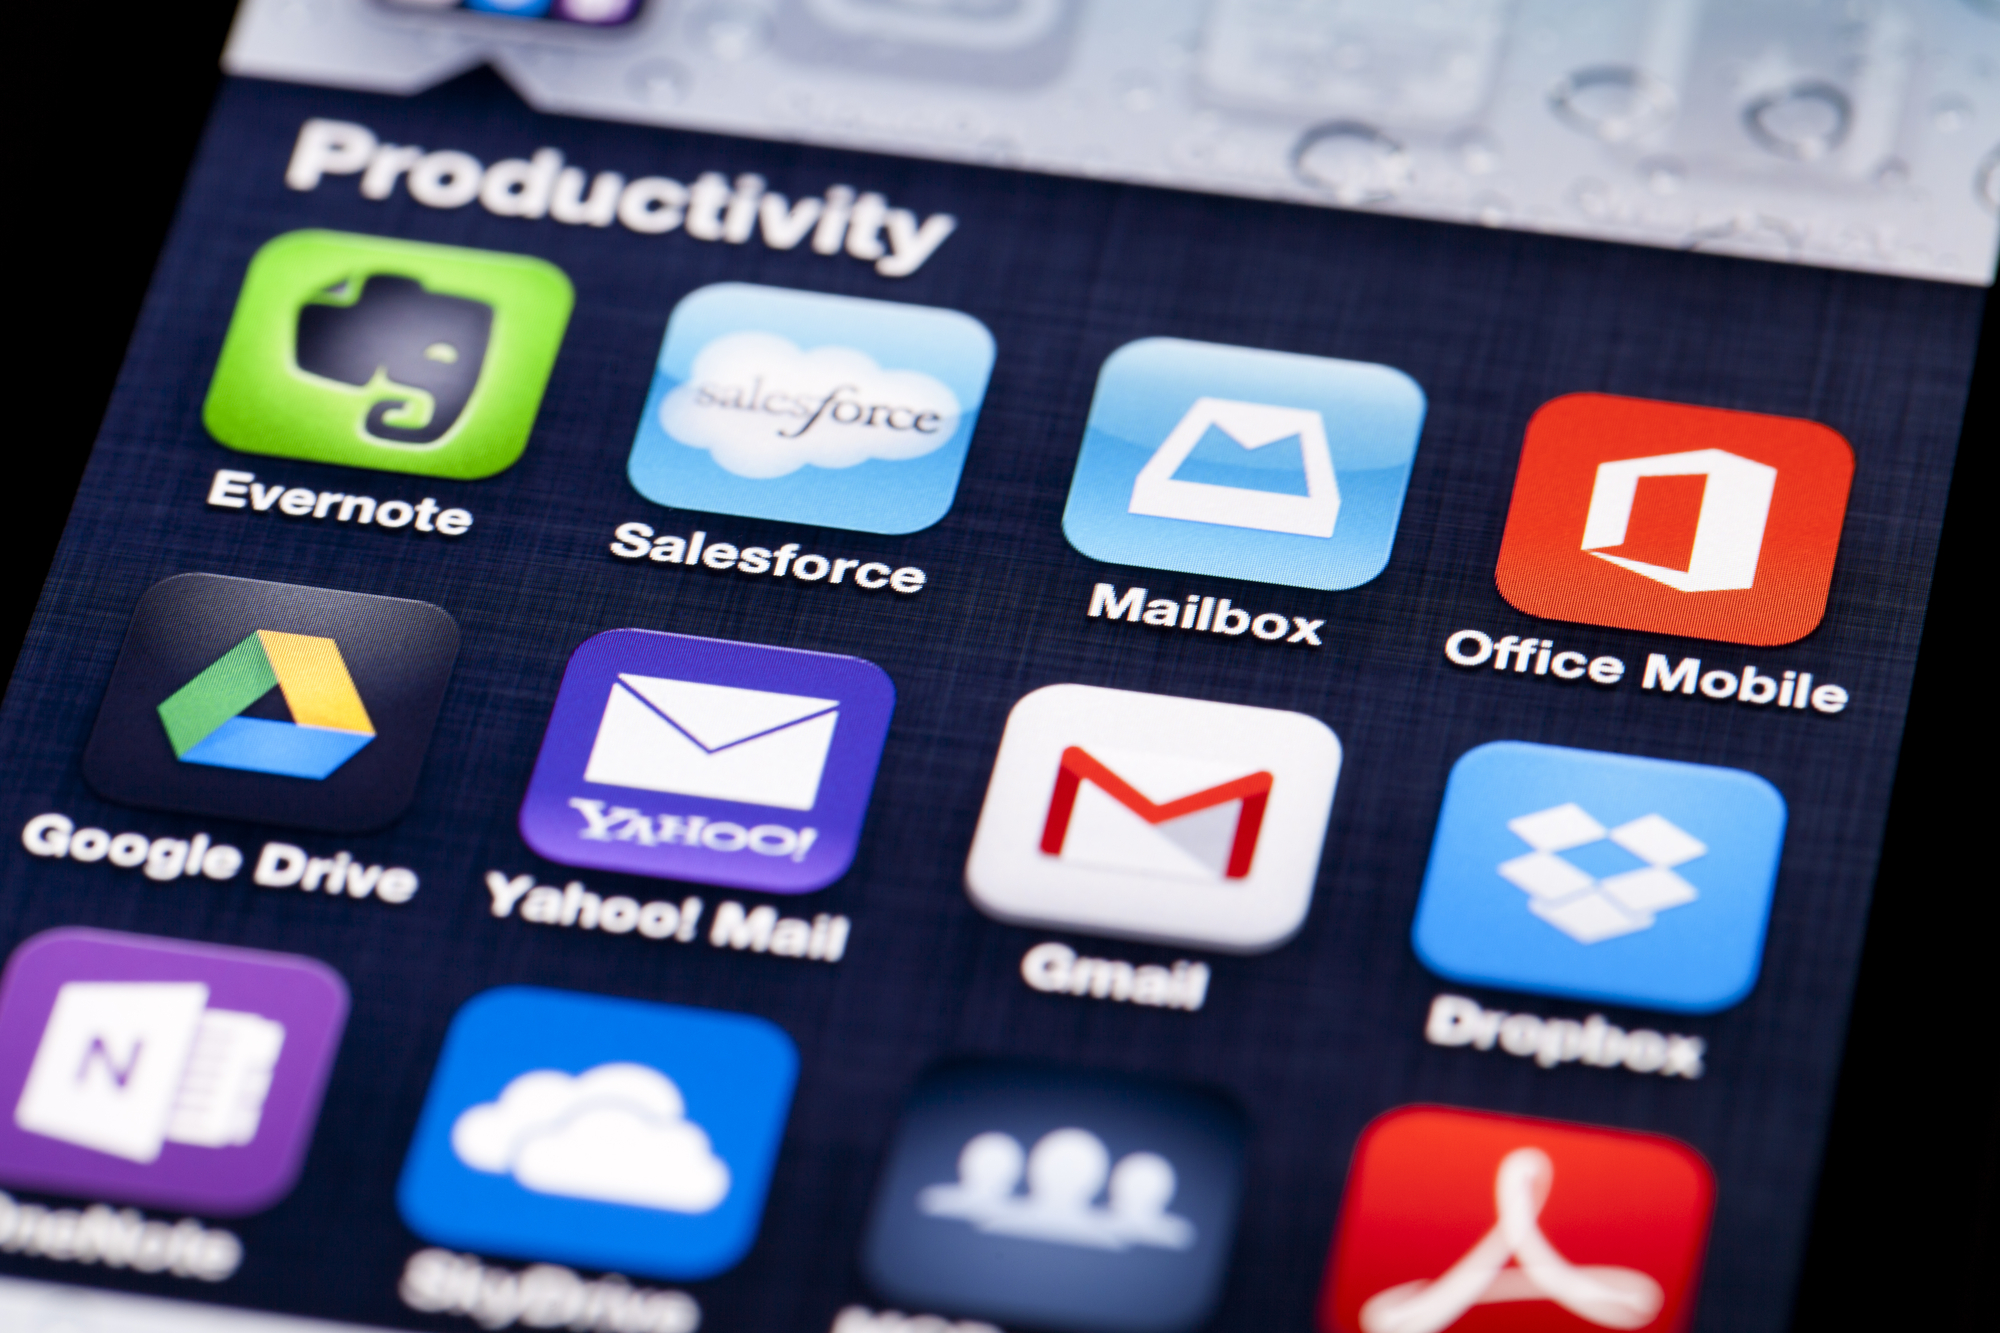 Image_of_mobile-screen_with_productivity_apps